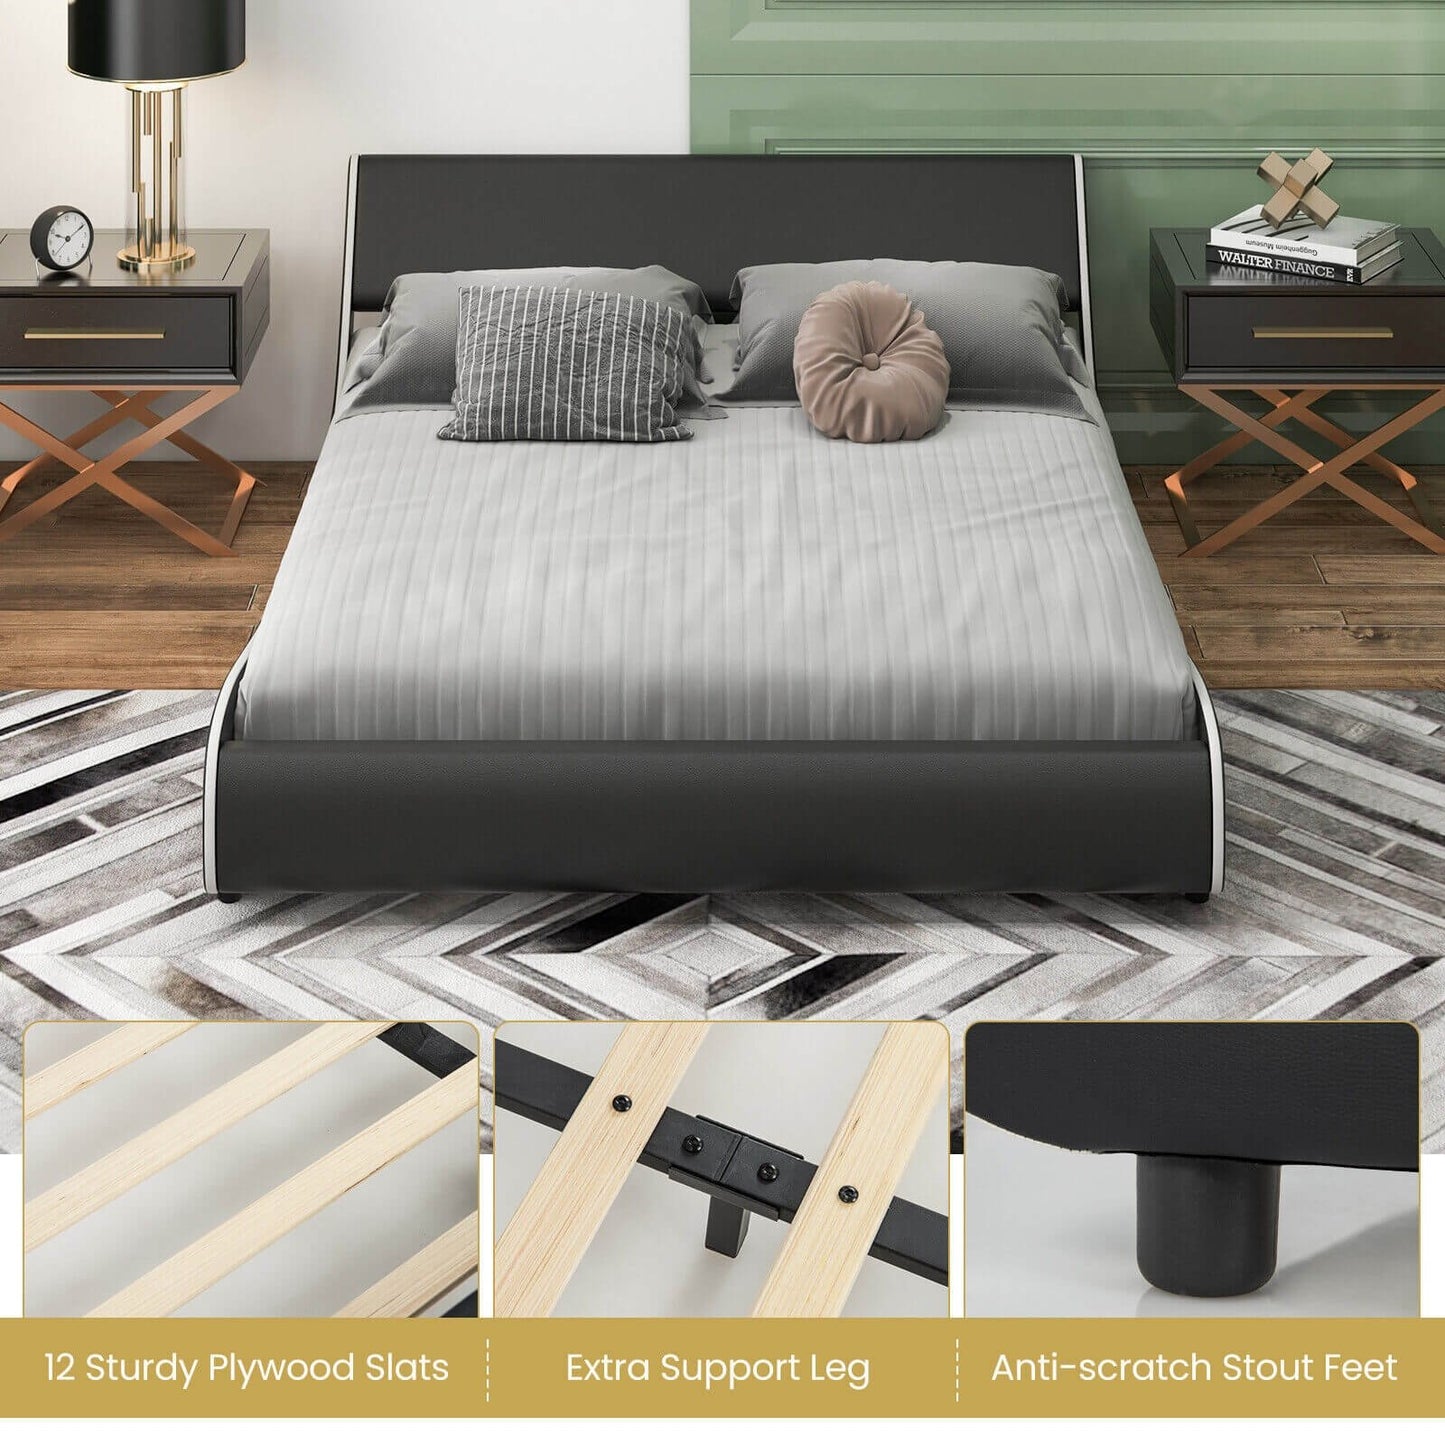 Upholstered Platform Bed Frame Low Profile Faux Leather with Curved Headboard-Queen Size, Black & White - Gallery Canada